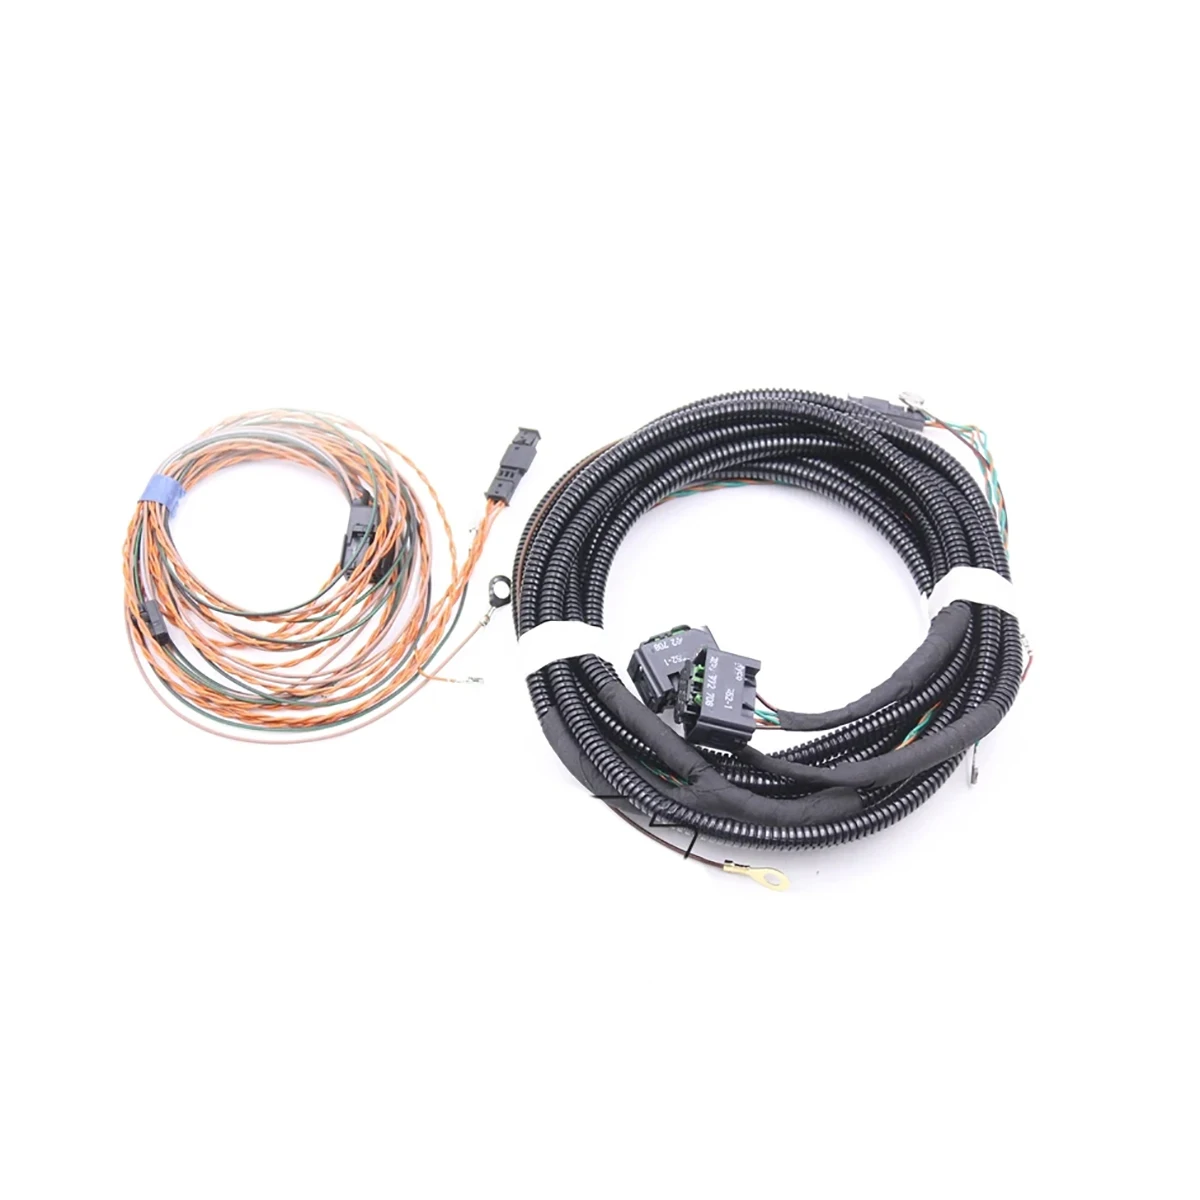 Lane assist Lane change keeping system ACC Adaptive Cruise Wire cable Harness Front Camera USE For Audi A4 A5 B9 8W Q5 80A Q7 4M